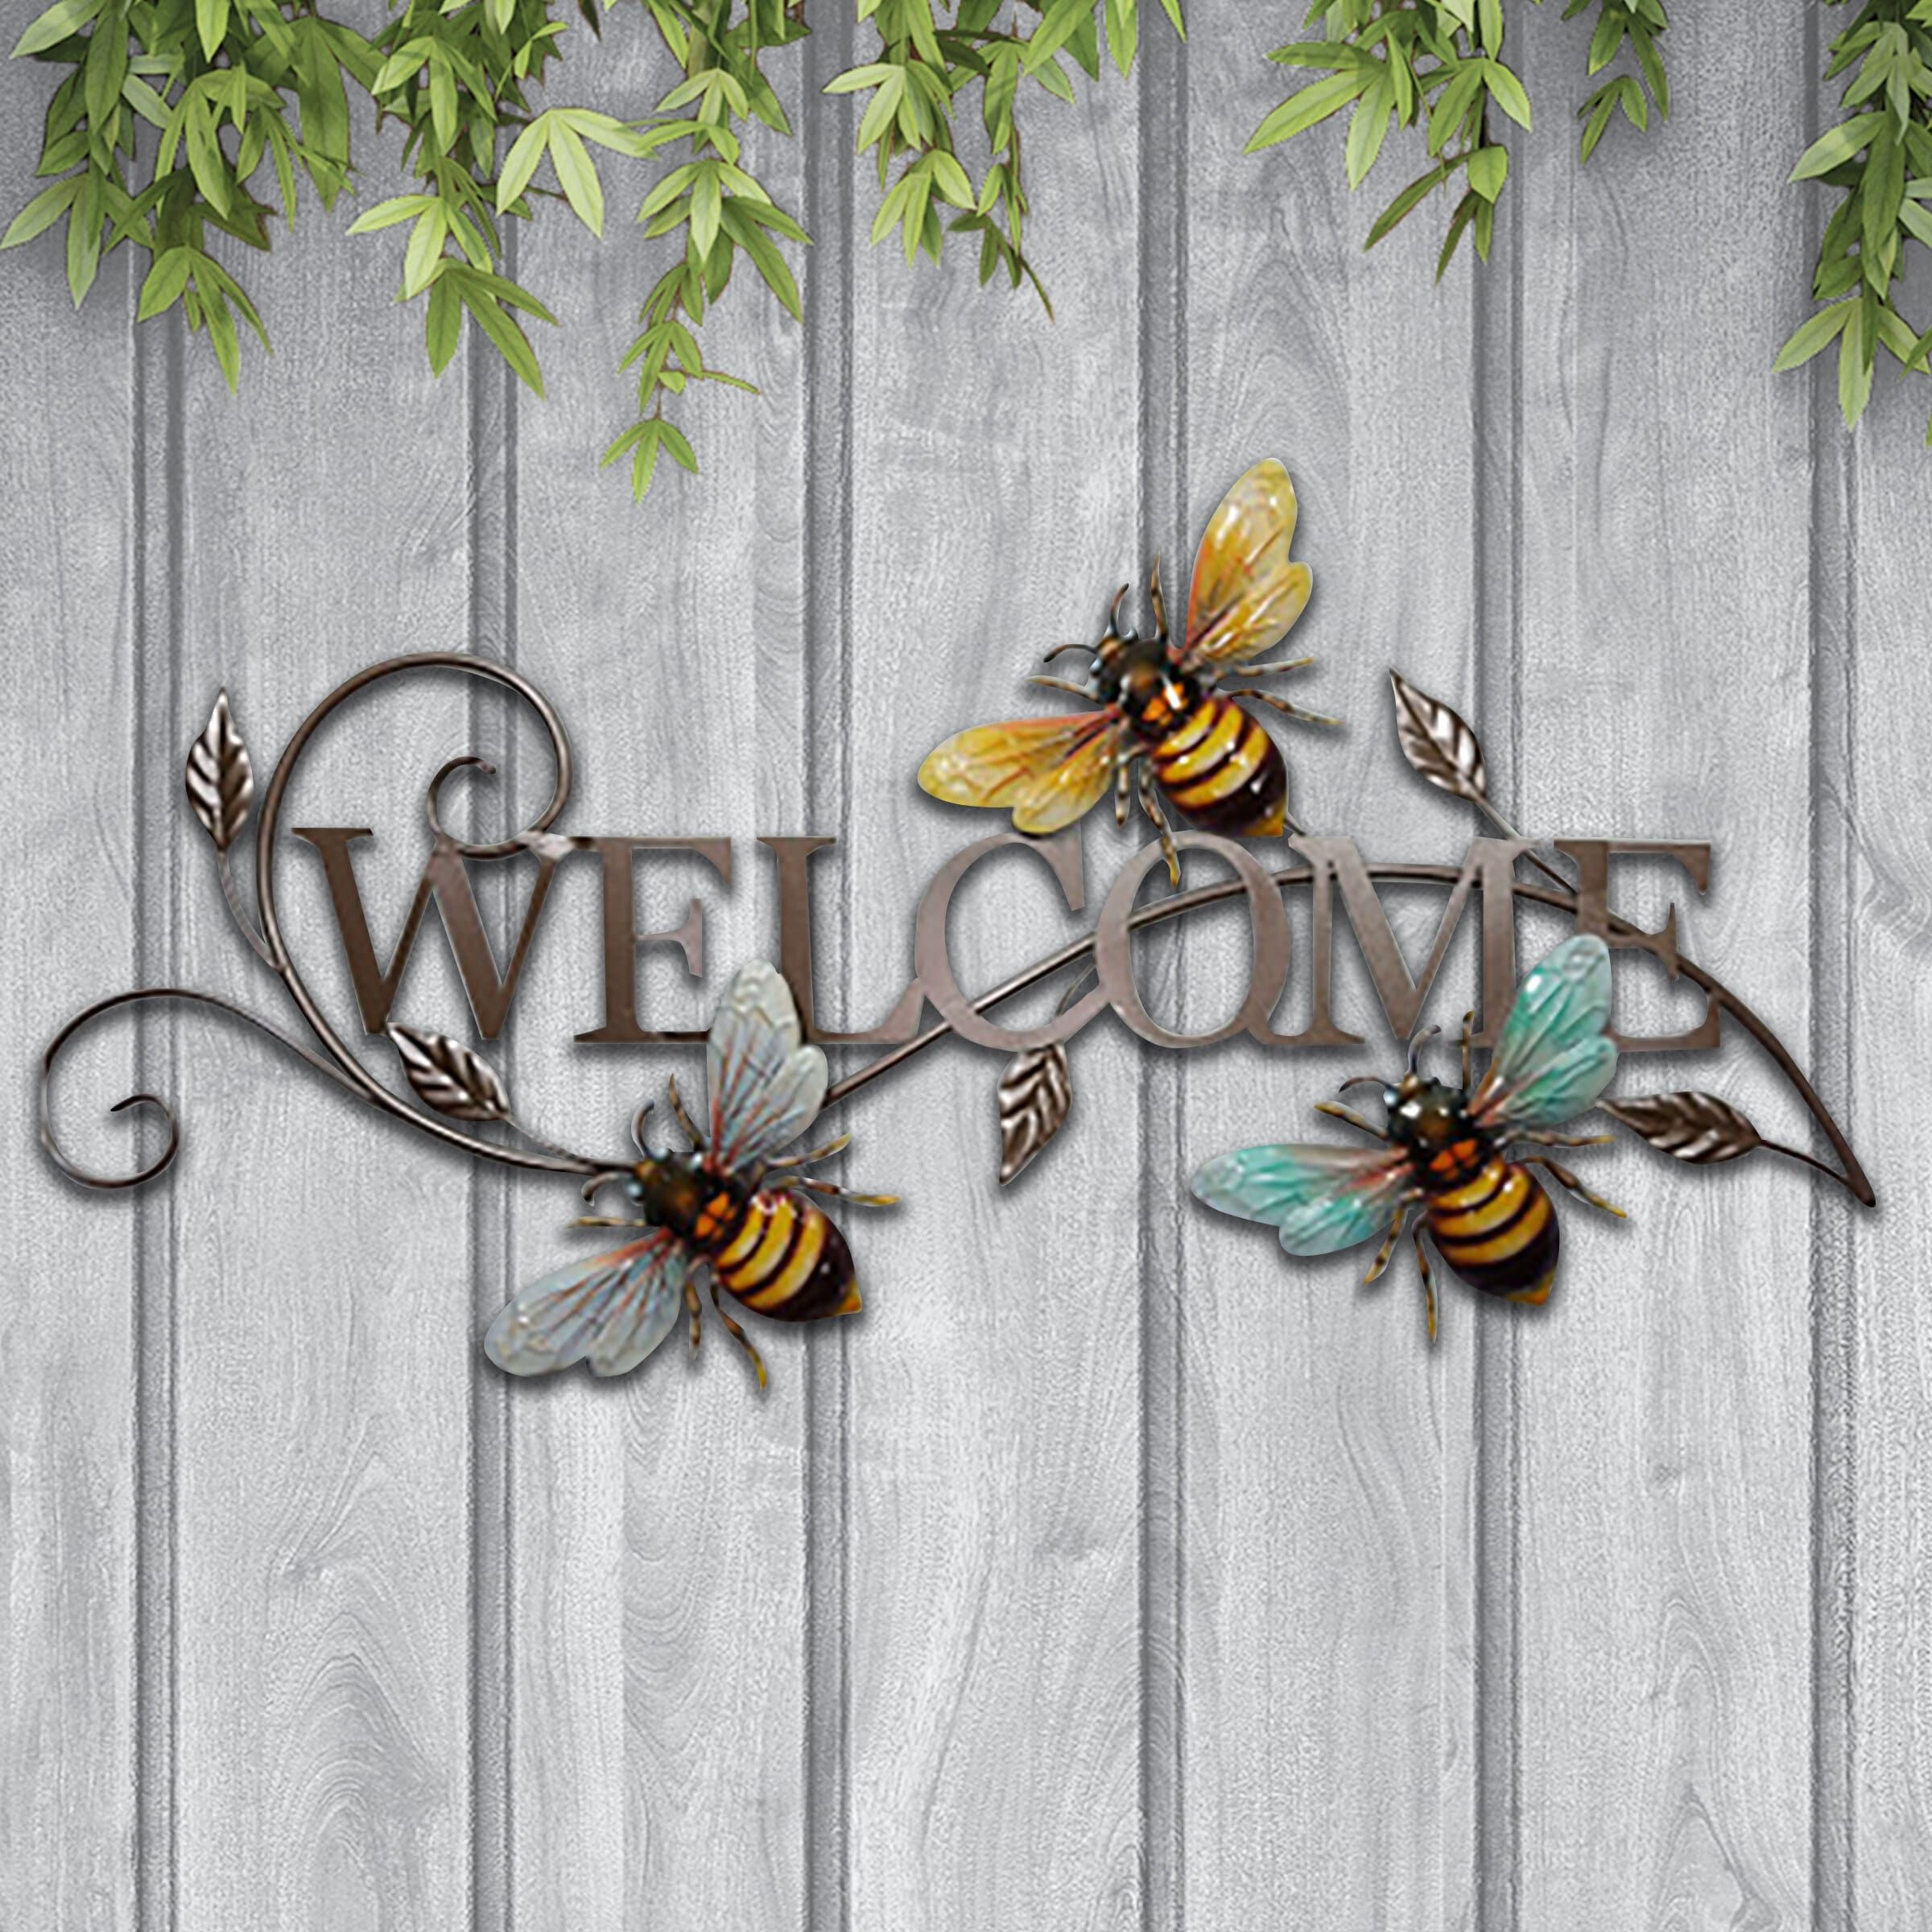 Metal Bumble Bees Welcome Sign Wall Art – Mirrorbee® Intended For Metal Wall Bumble Bee Wall Art (View 13 of 15)